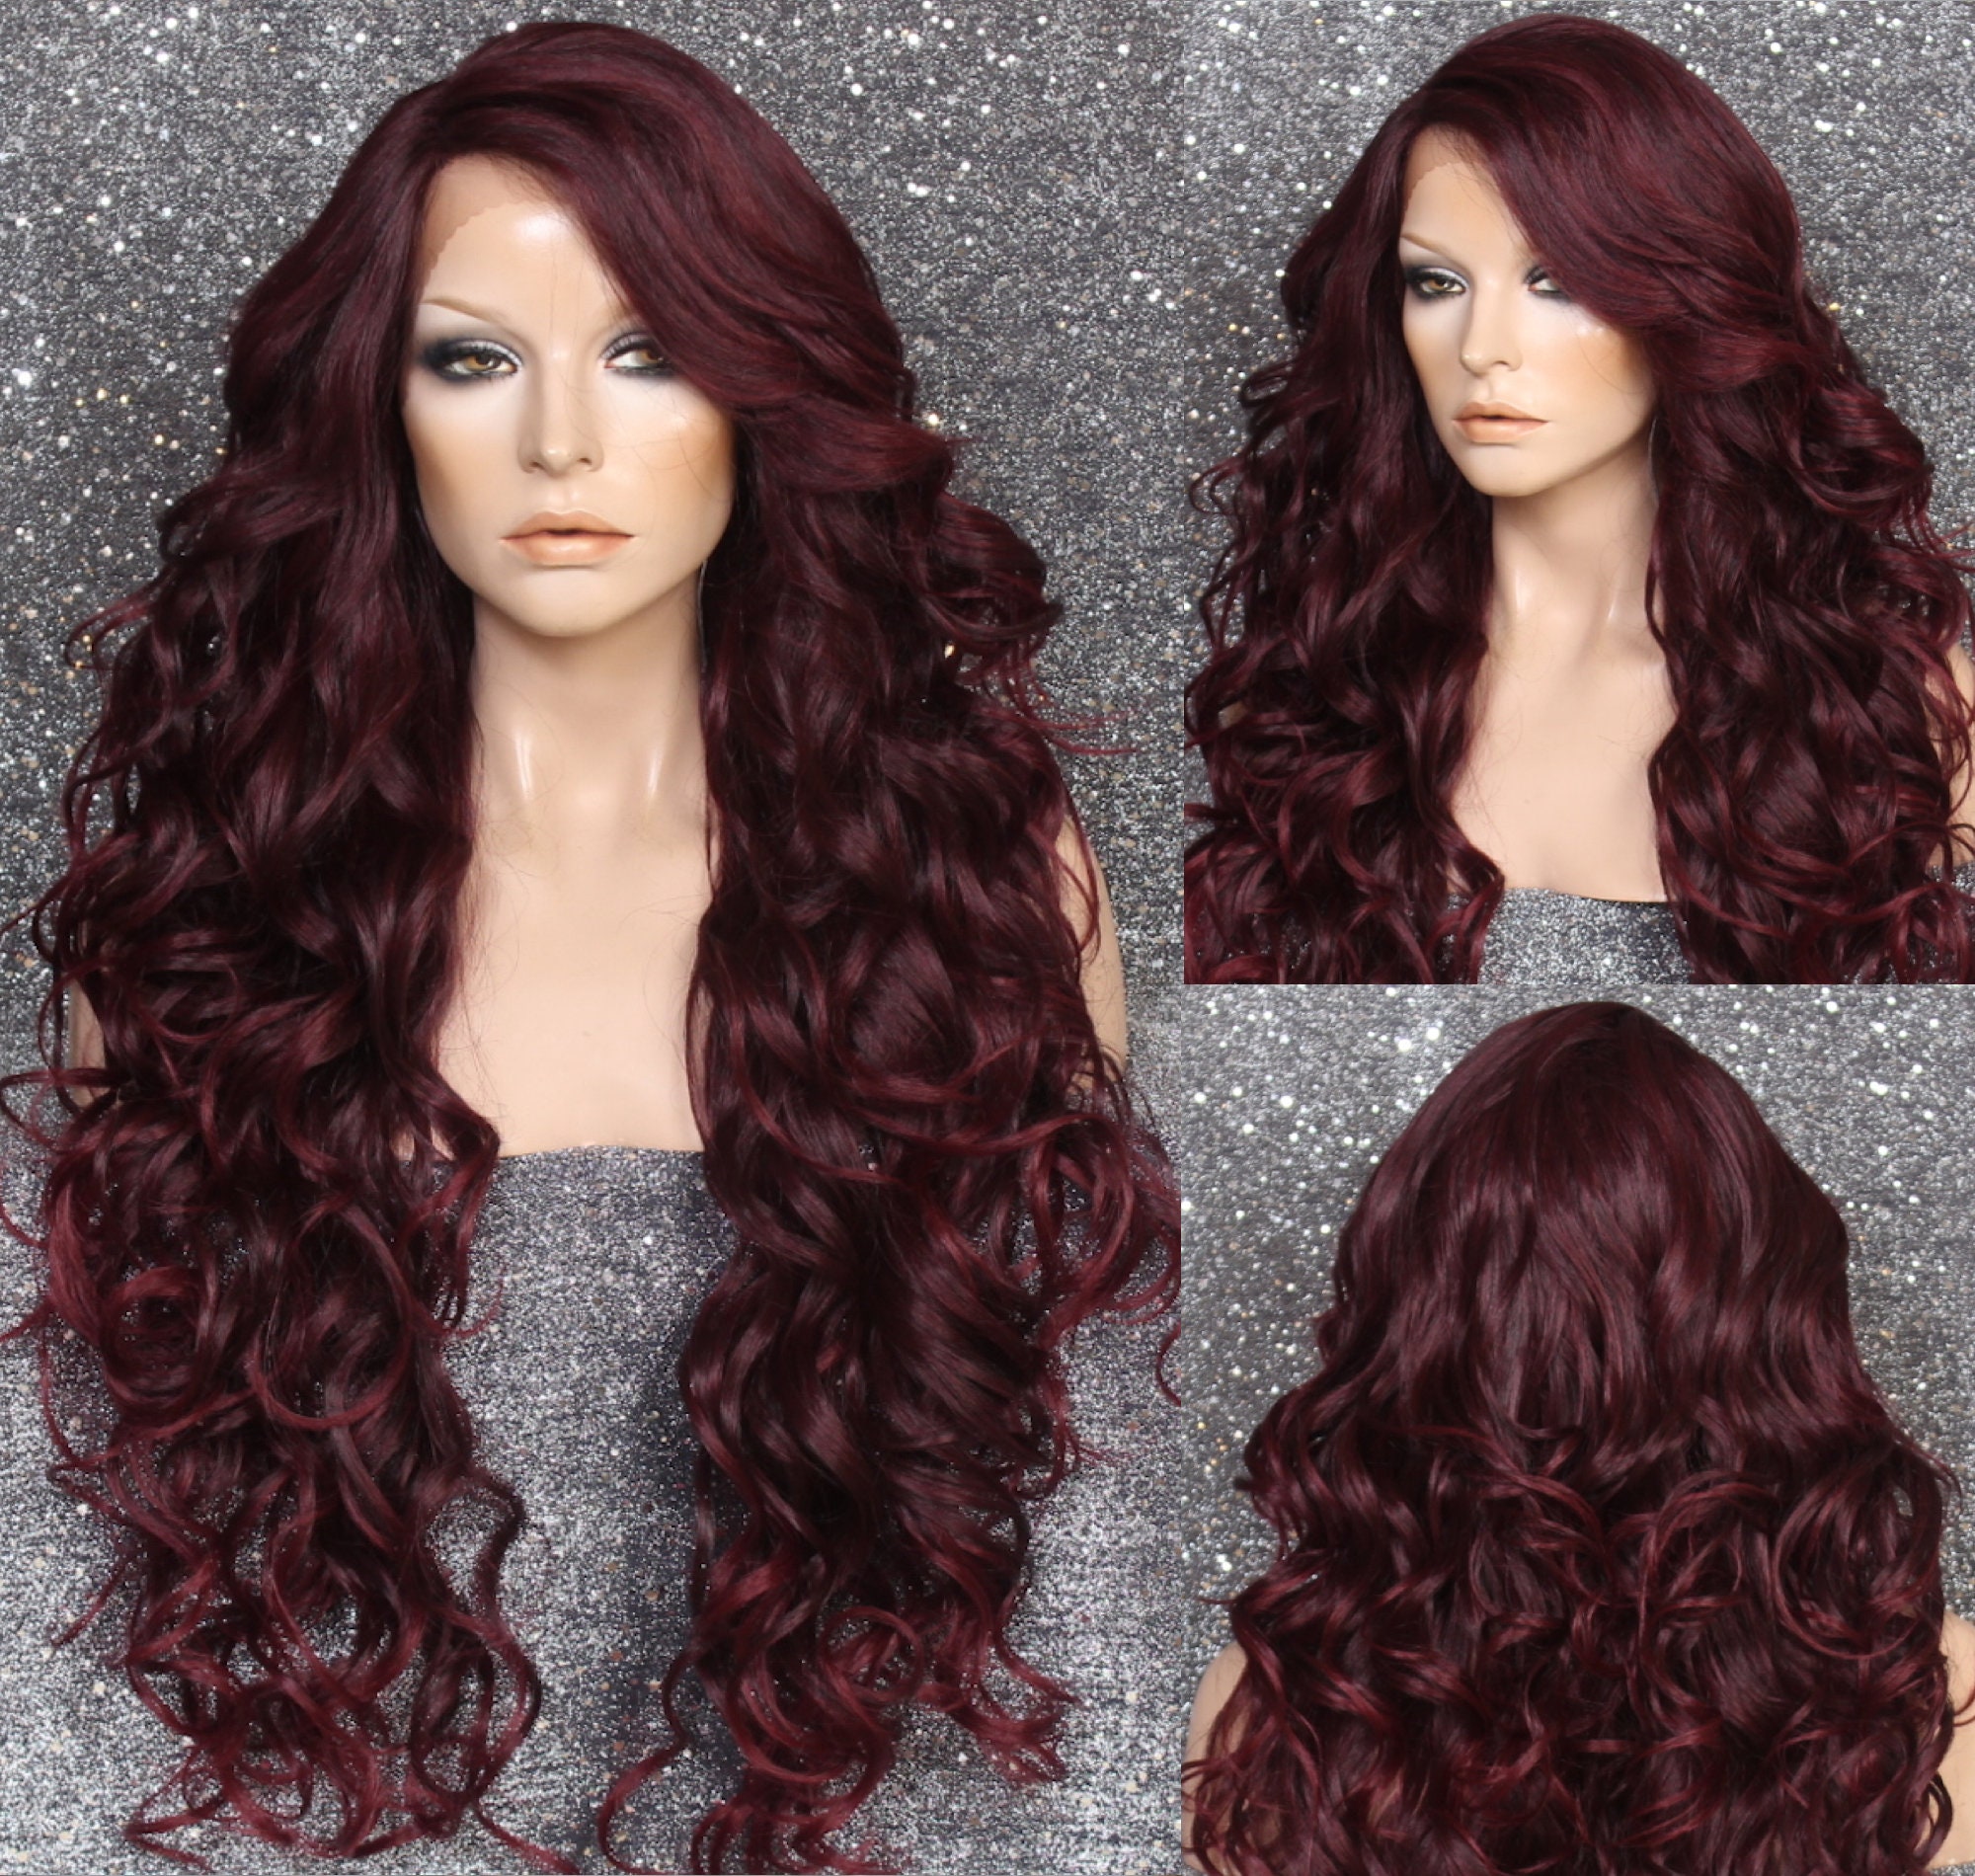 Extra Long Human Hair Blend Lace Front Wig 38 Curly Burgundy Mix Heat Safe Cancer/Alopecia/Theater/Cosplay/Club